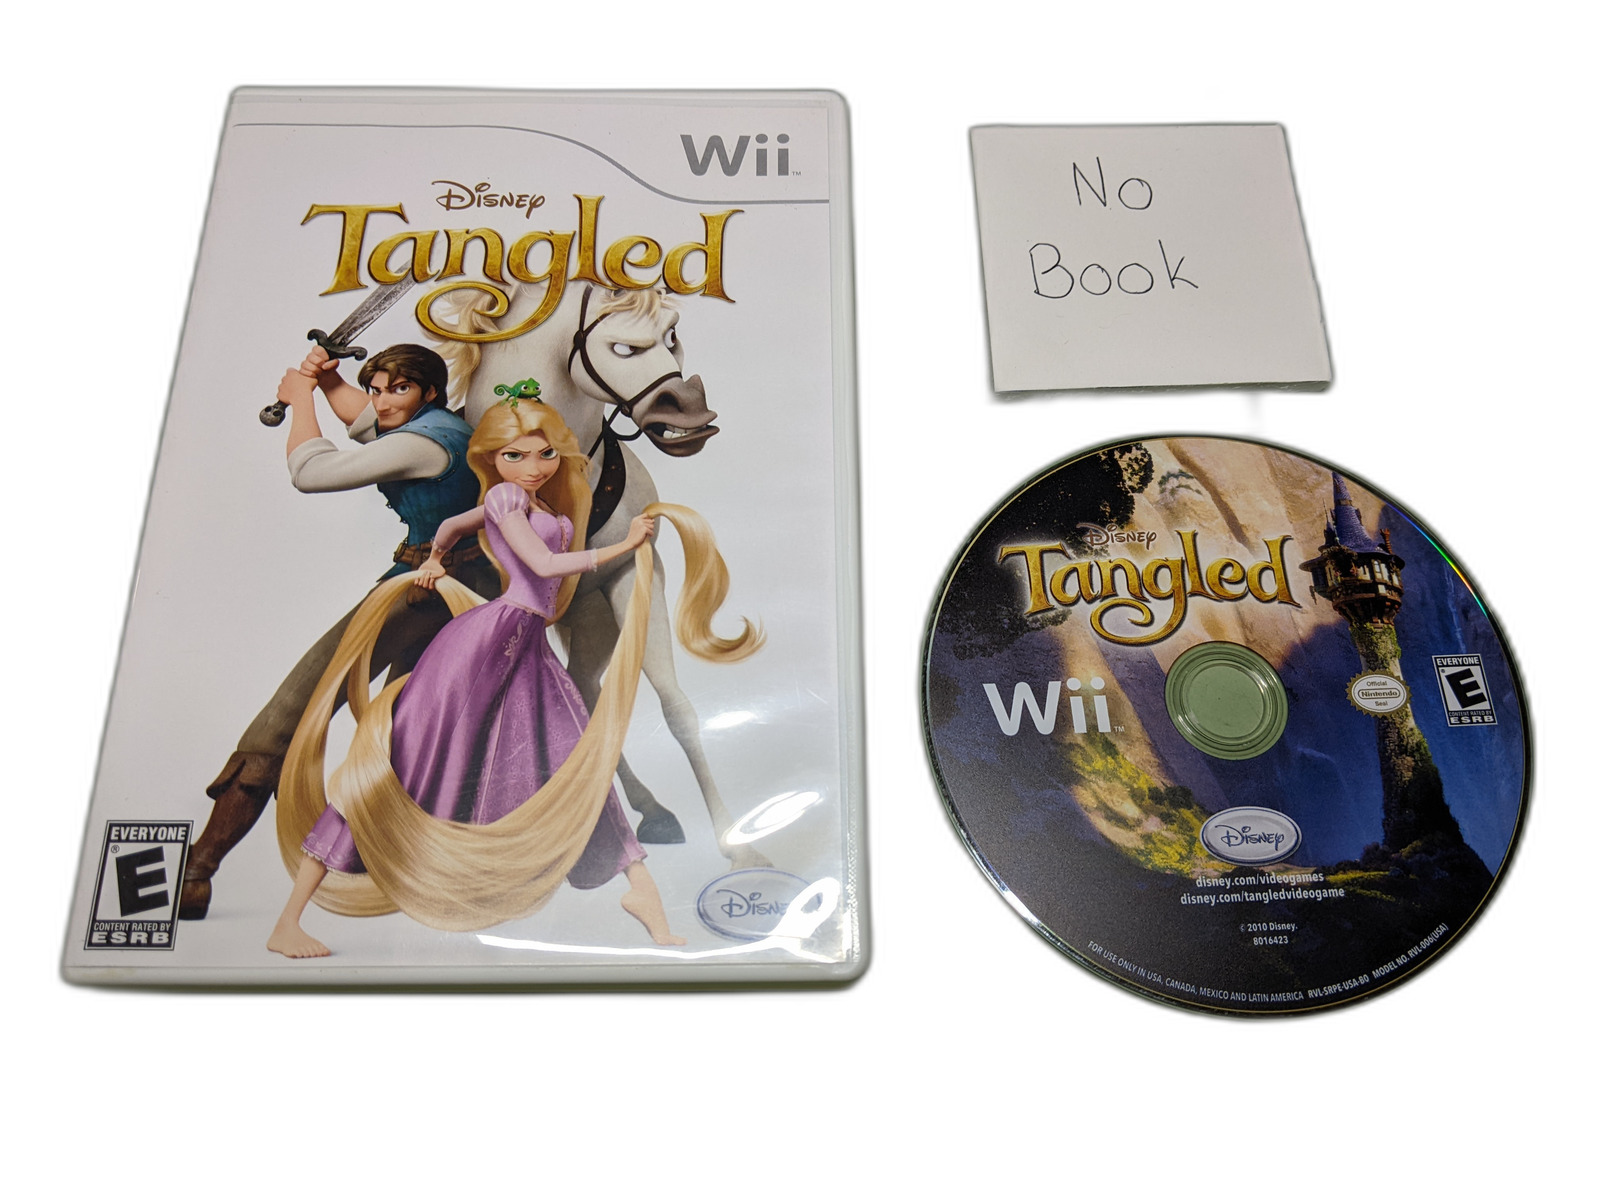 Primary image for Tangled Nintendo Wii Disk and Case